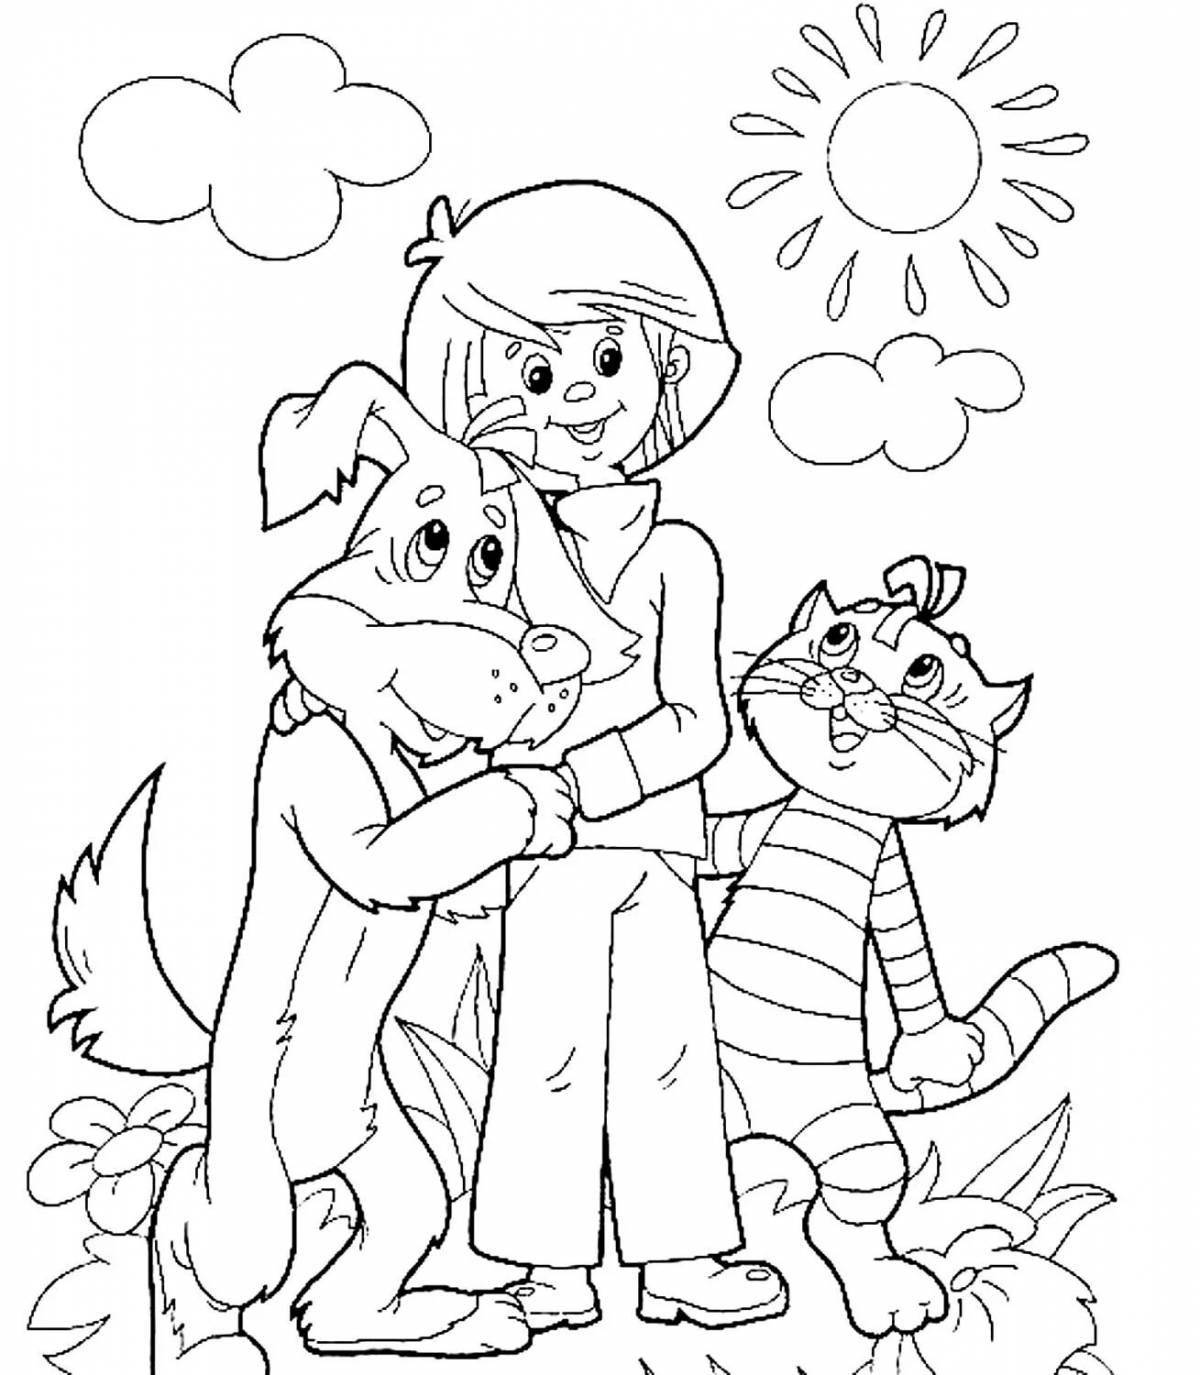 Charming uncle fyodor dog and cat coloring book